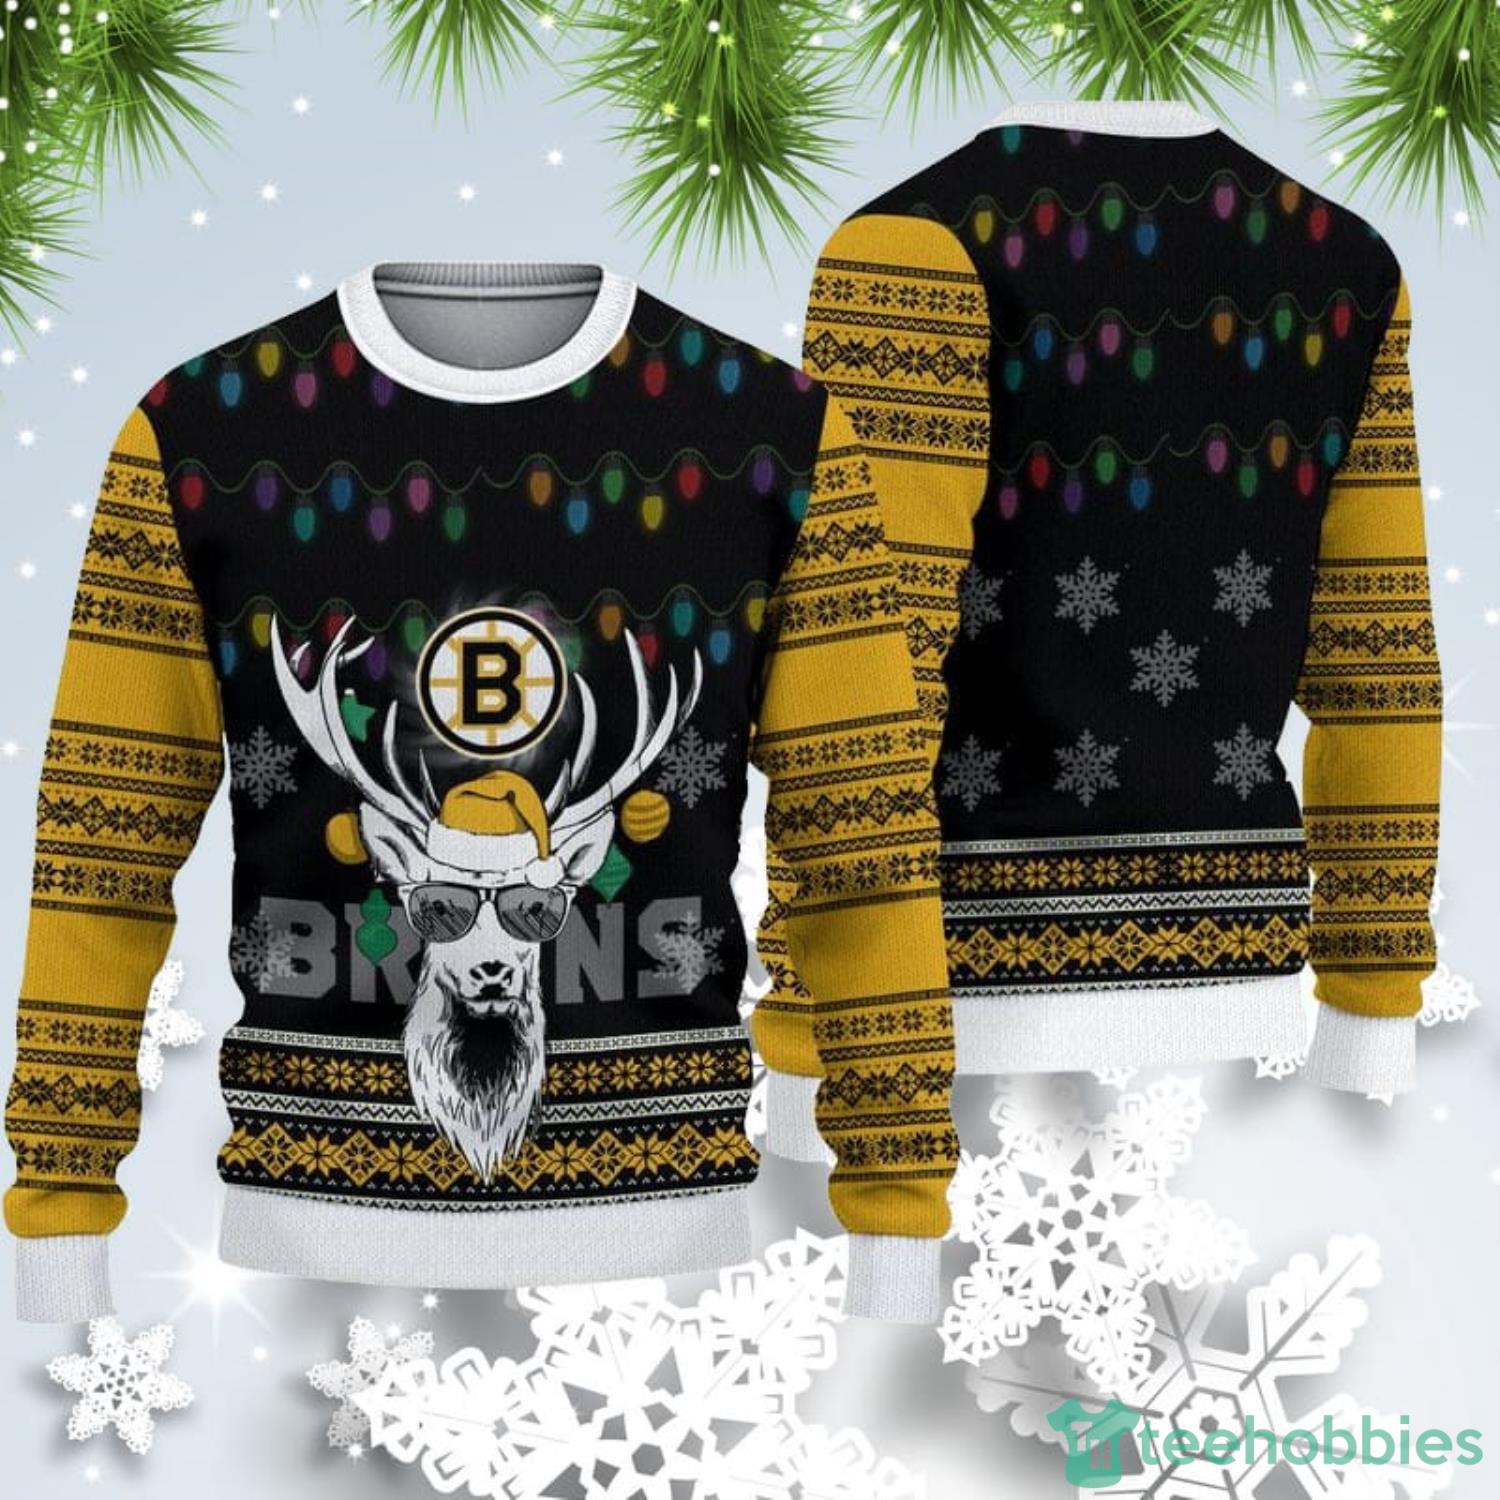 Boston Bruins UGLY Christmas SWEATER Crew Neck "Patches" NHL NEW  2015